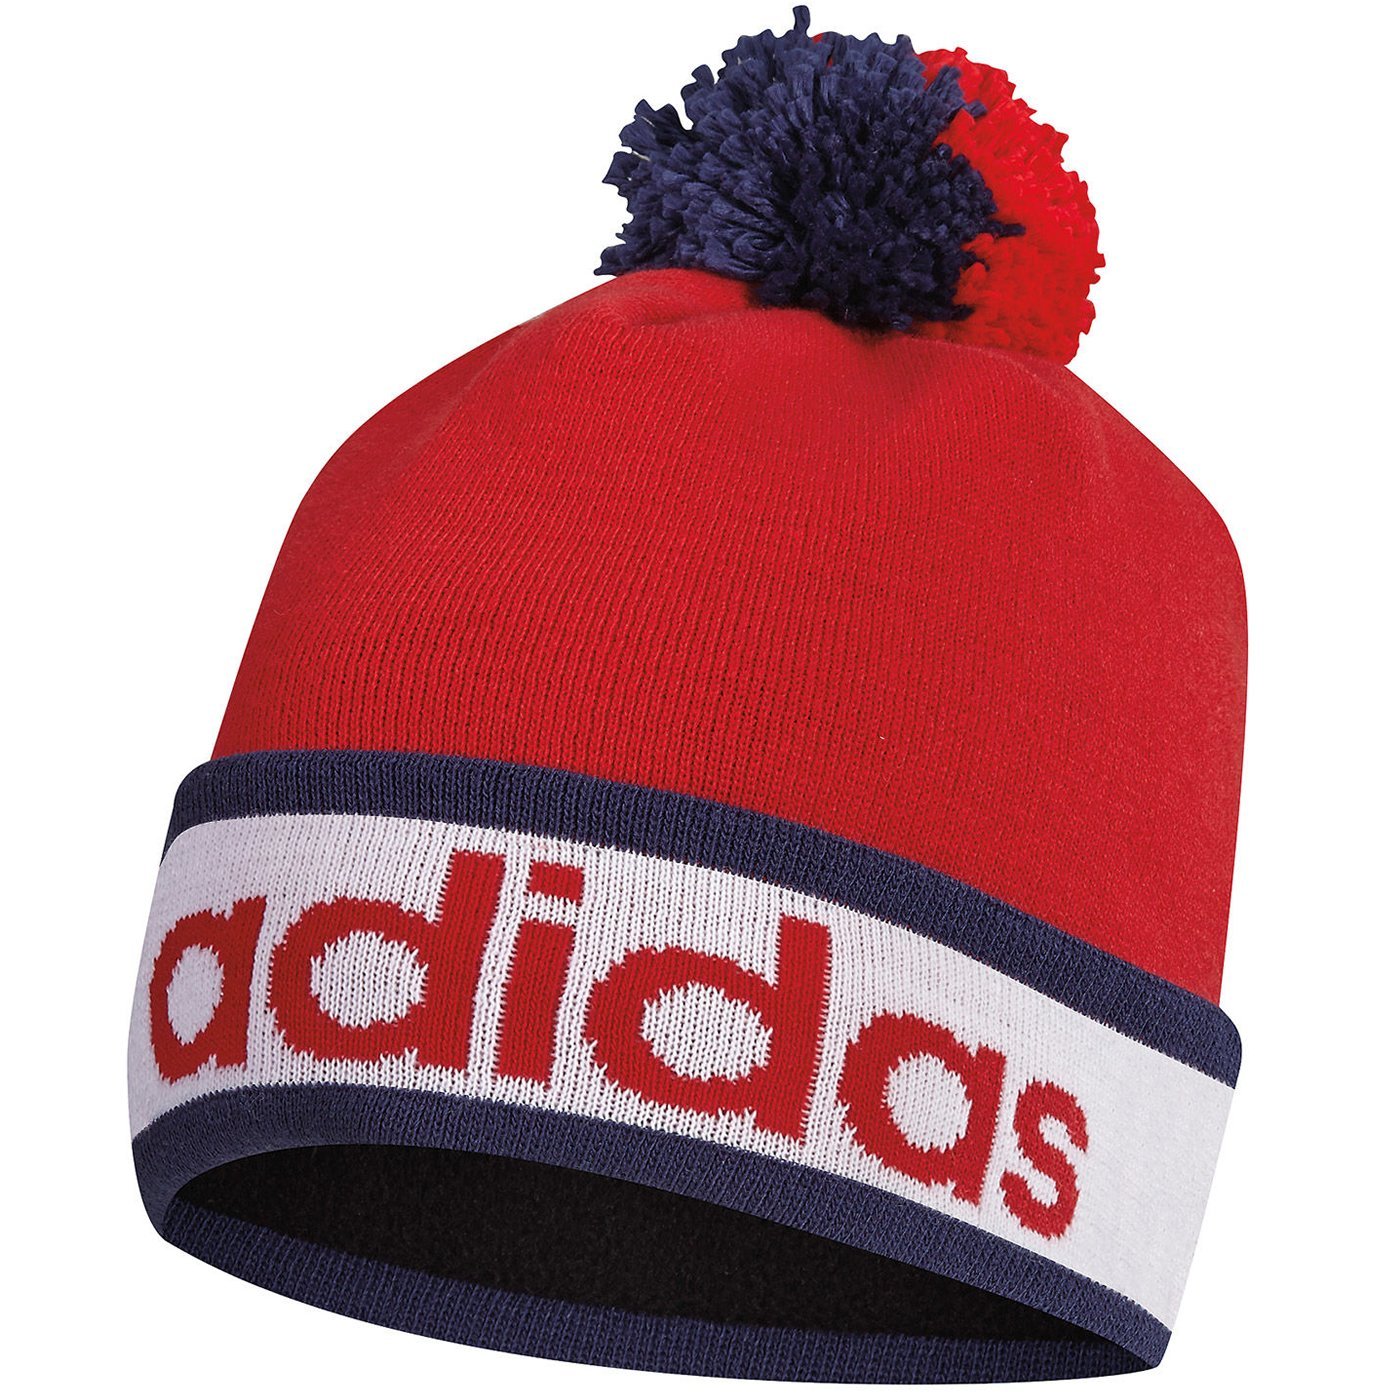 mens adidas wooly hat